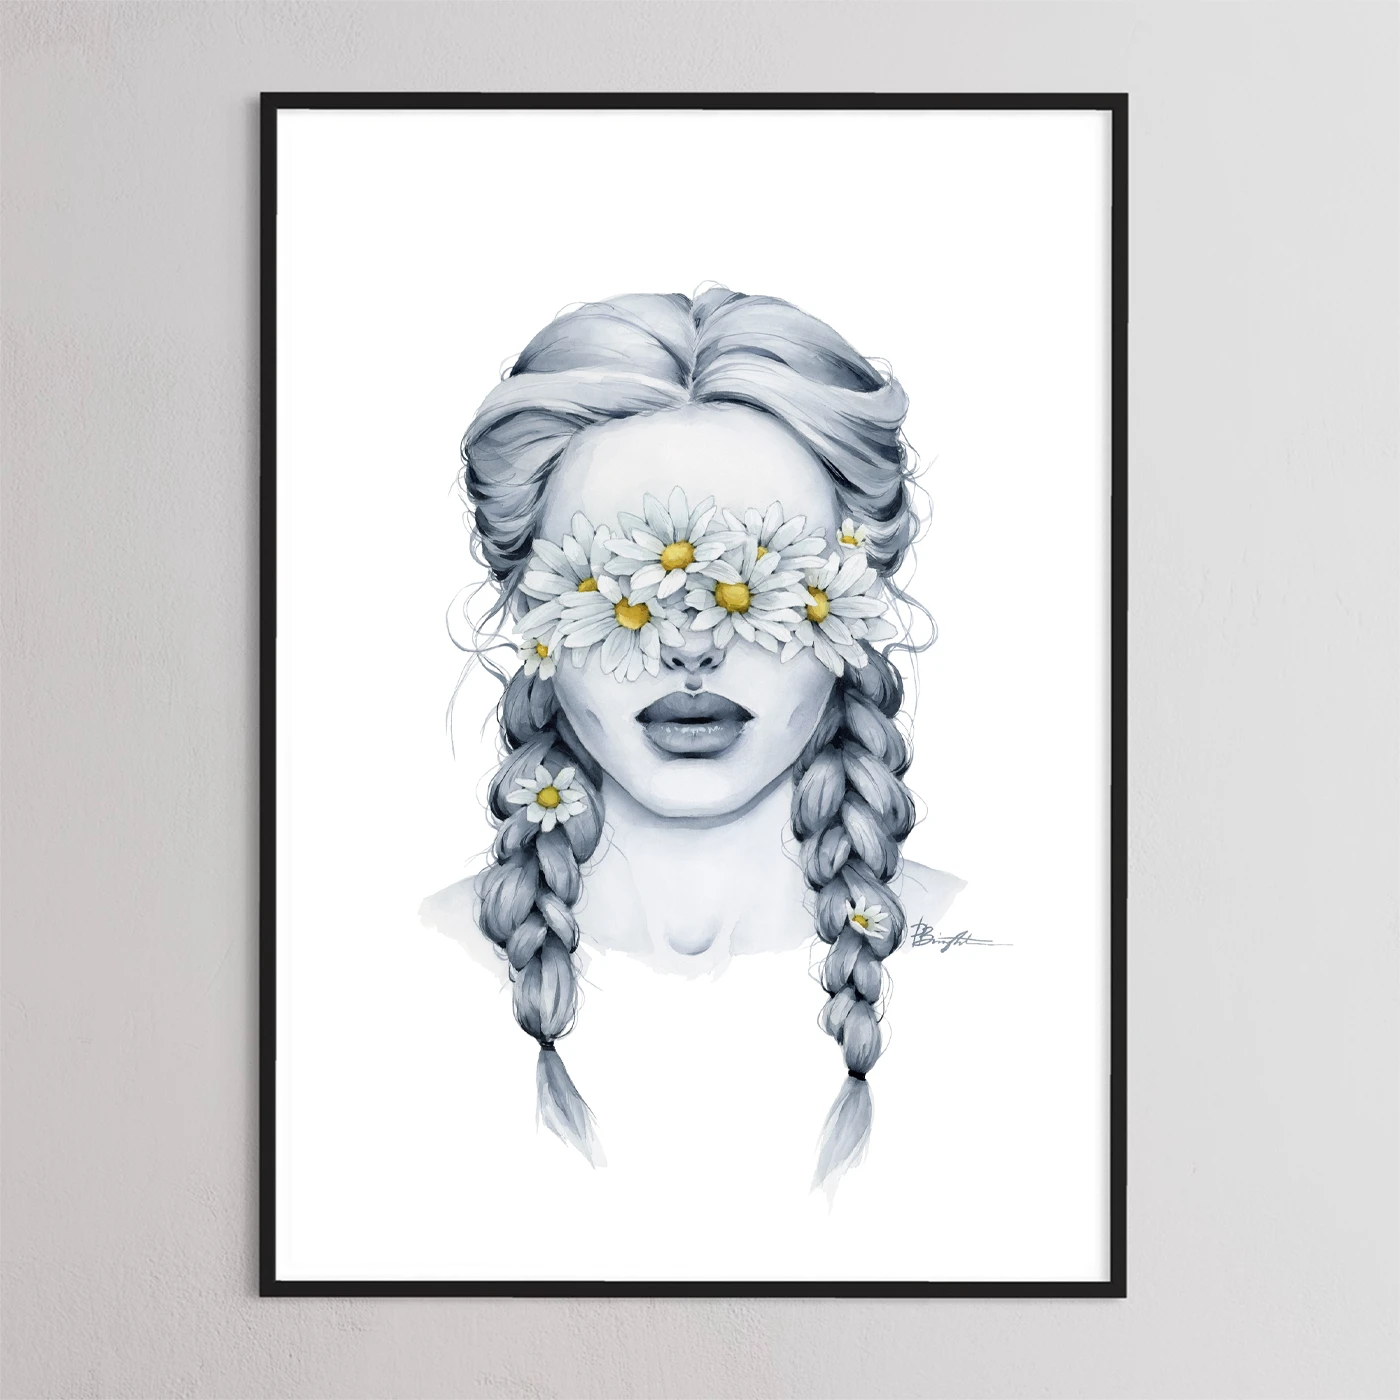 Chamomile blindfolded print by Polina Bright